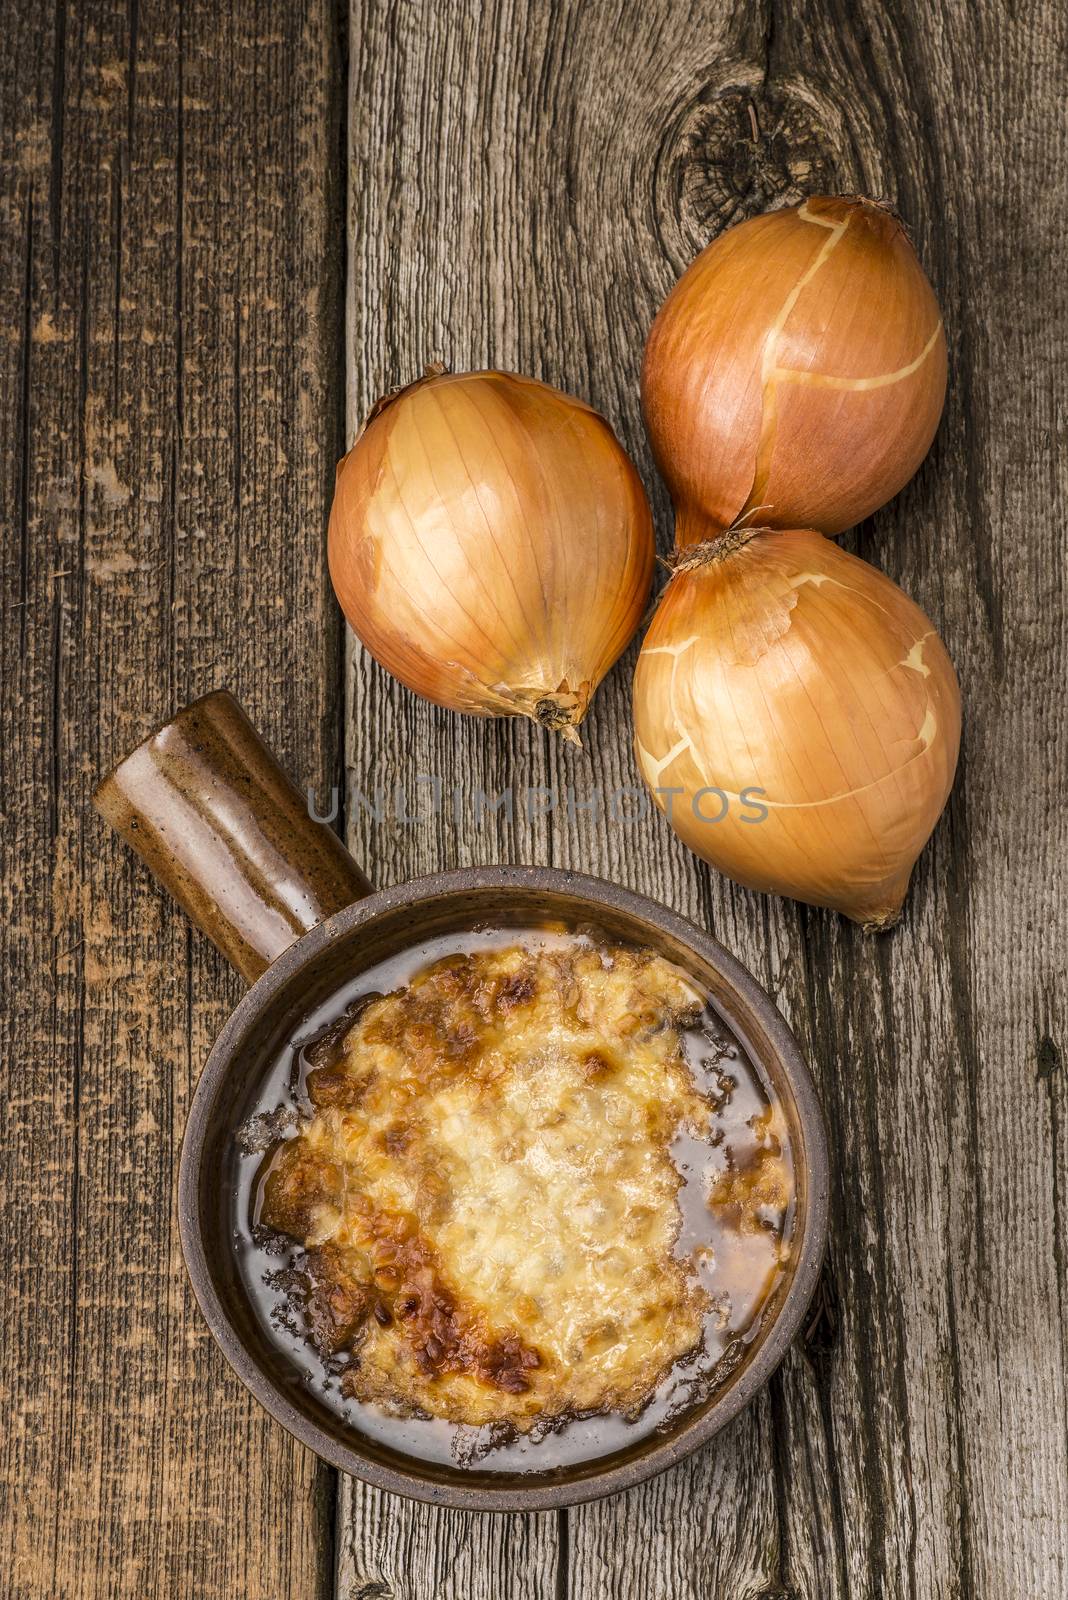 French Onion Soup Bowl by billberryphotography